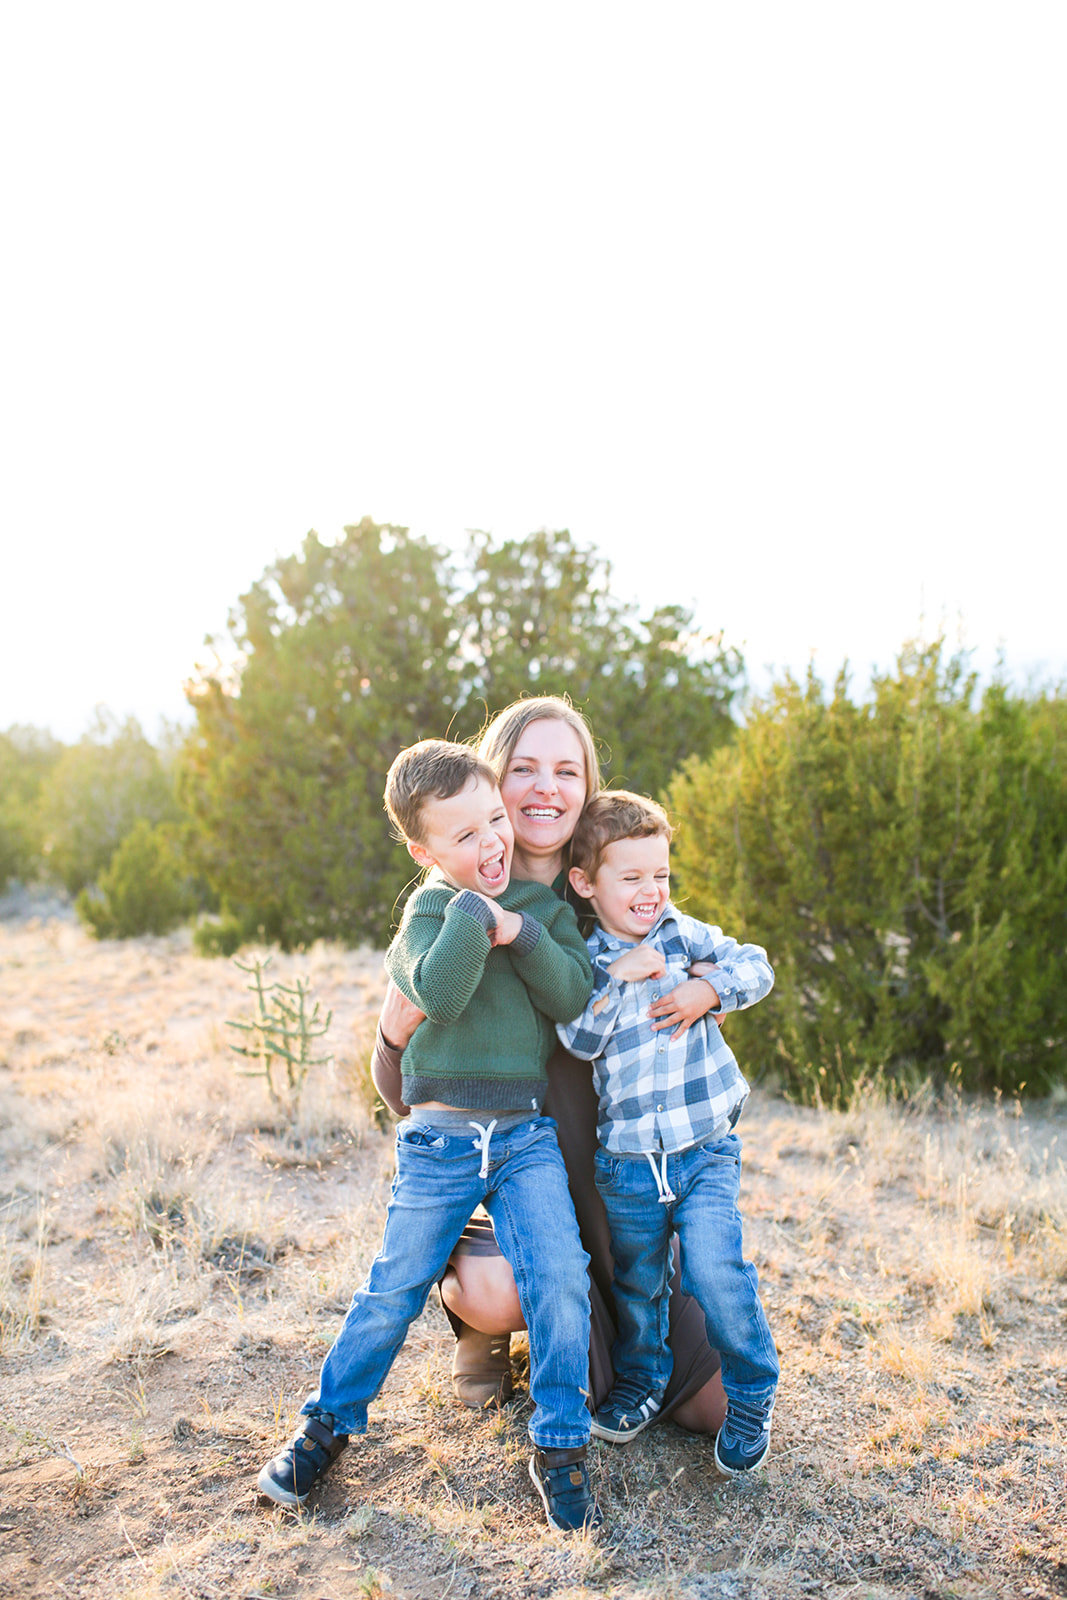 Albuquerque Family Photography_Foothills_www.tylerbrooke.com_Kate Kauffman_027